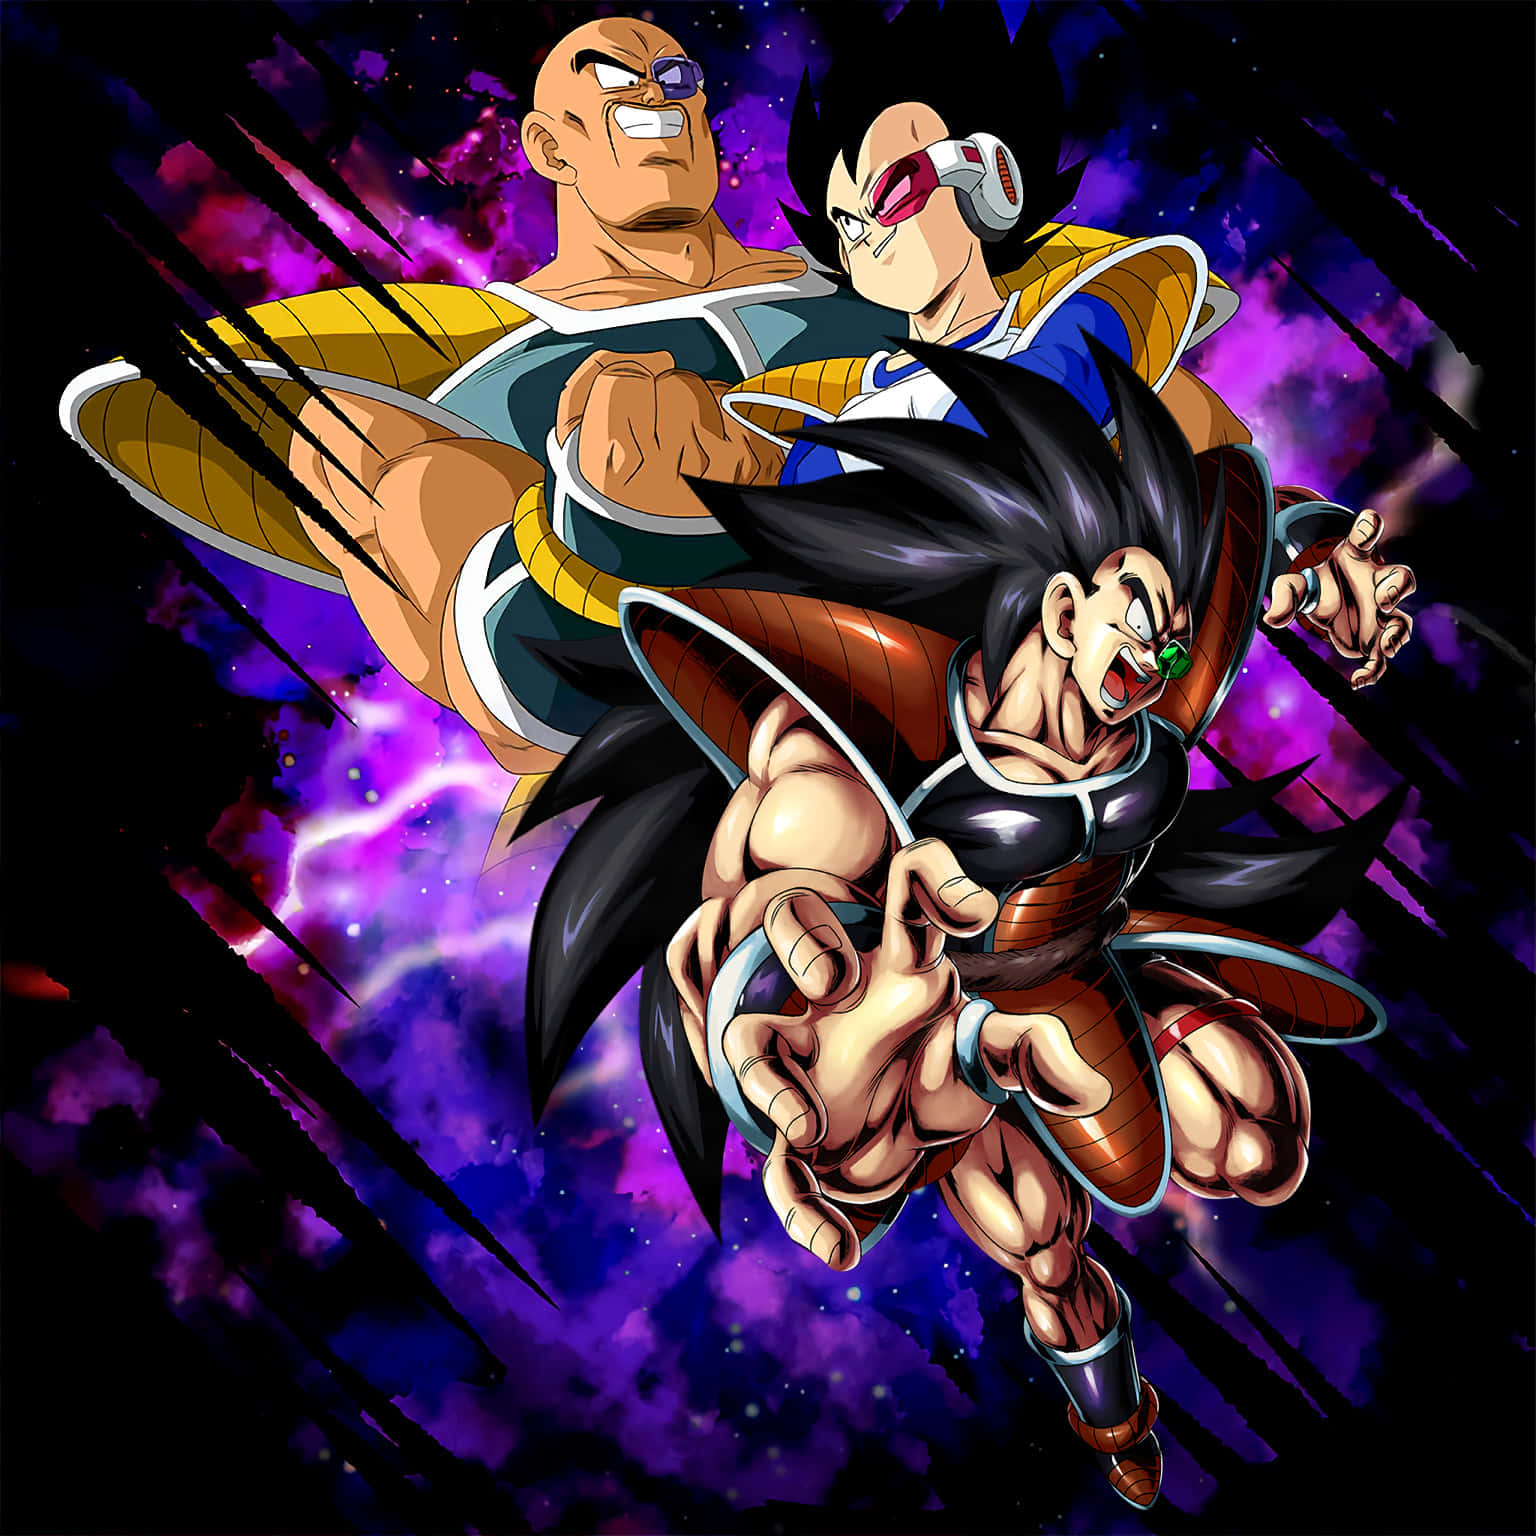 Raditz and Goku reunite to defeat the forces of evil Wallpaper